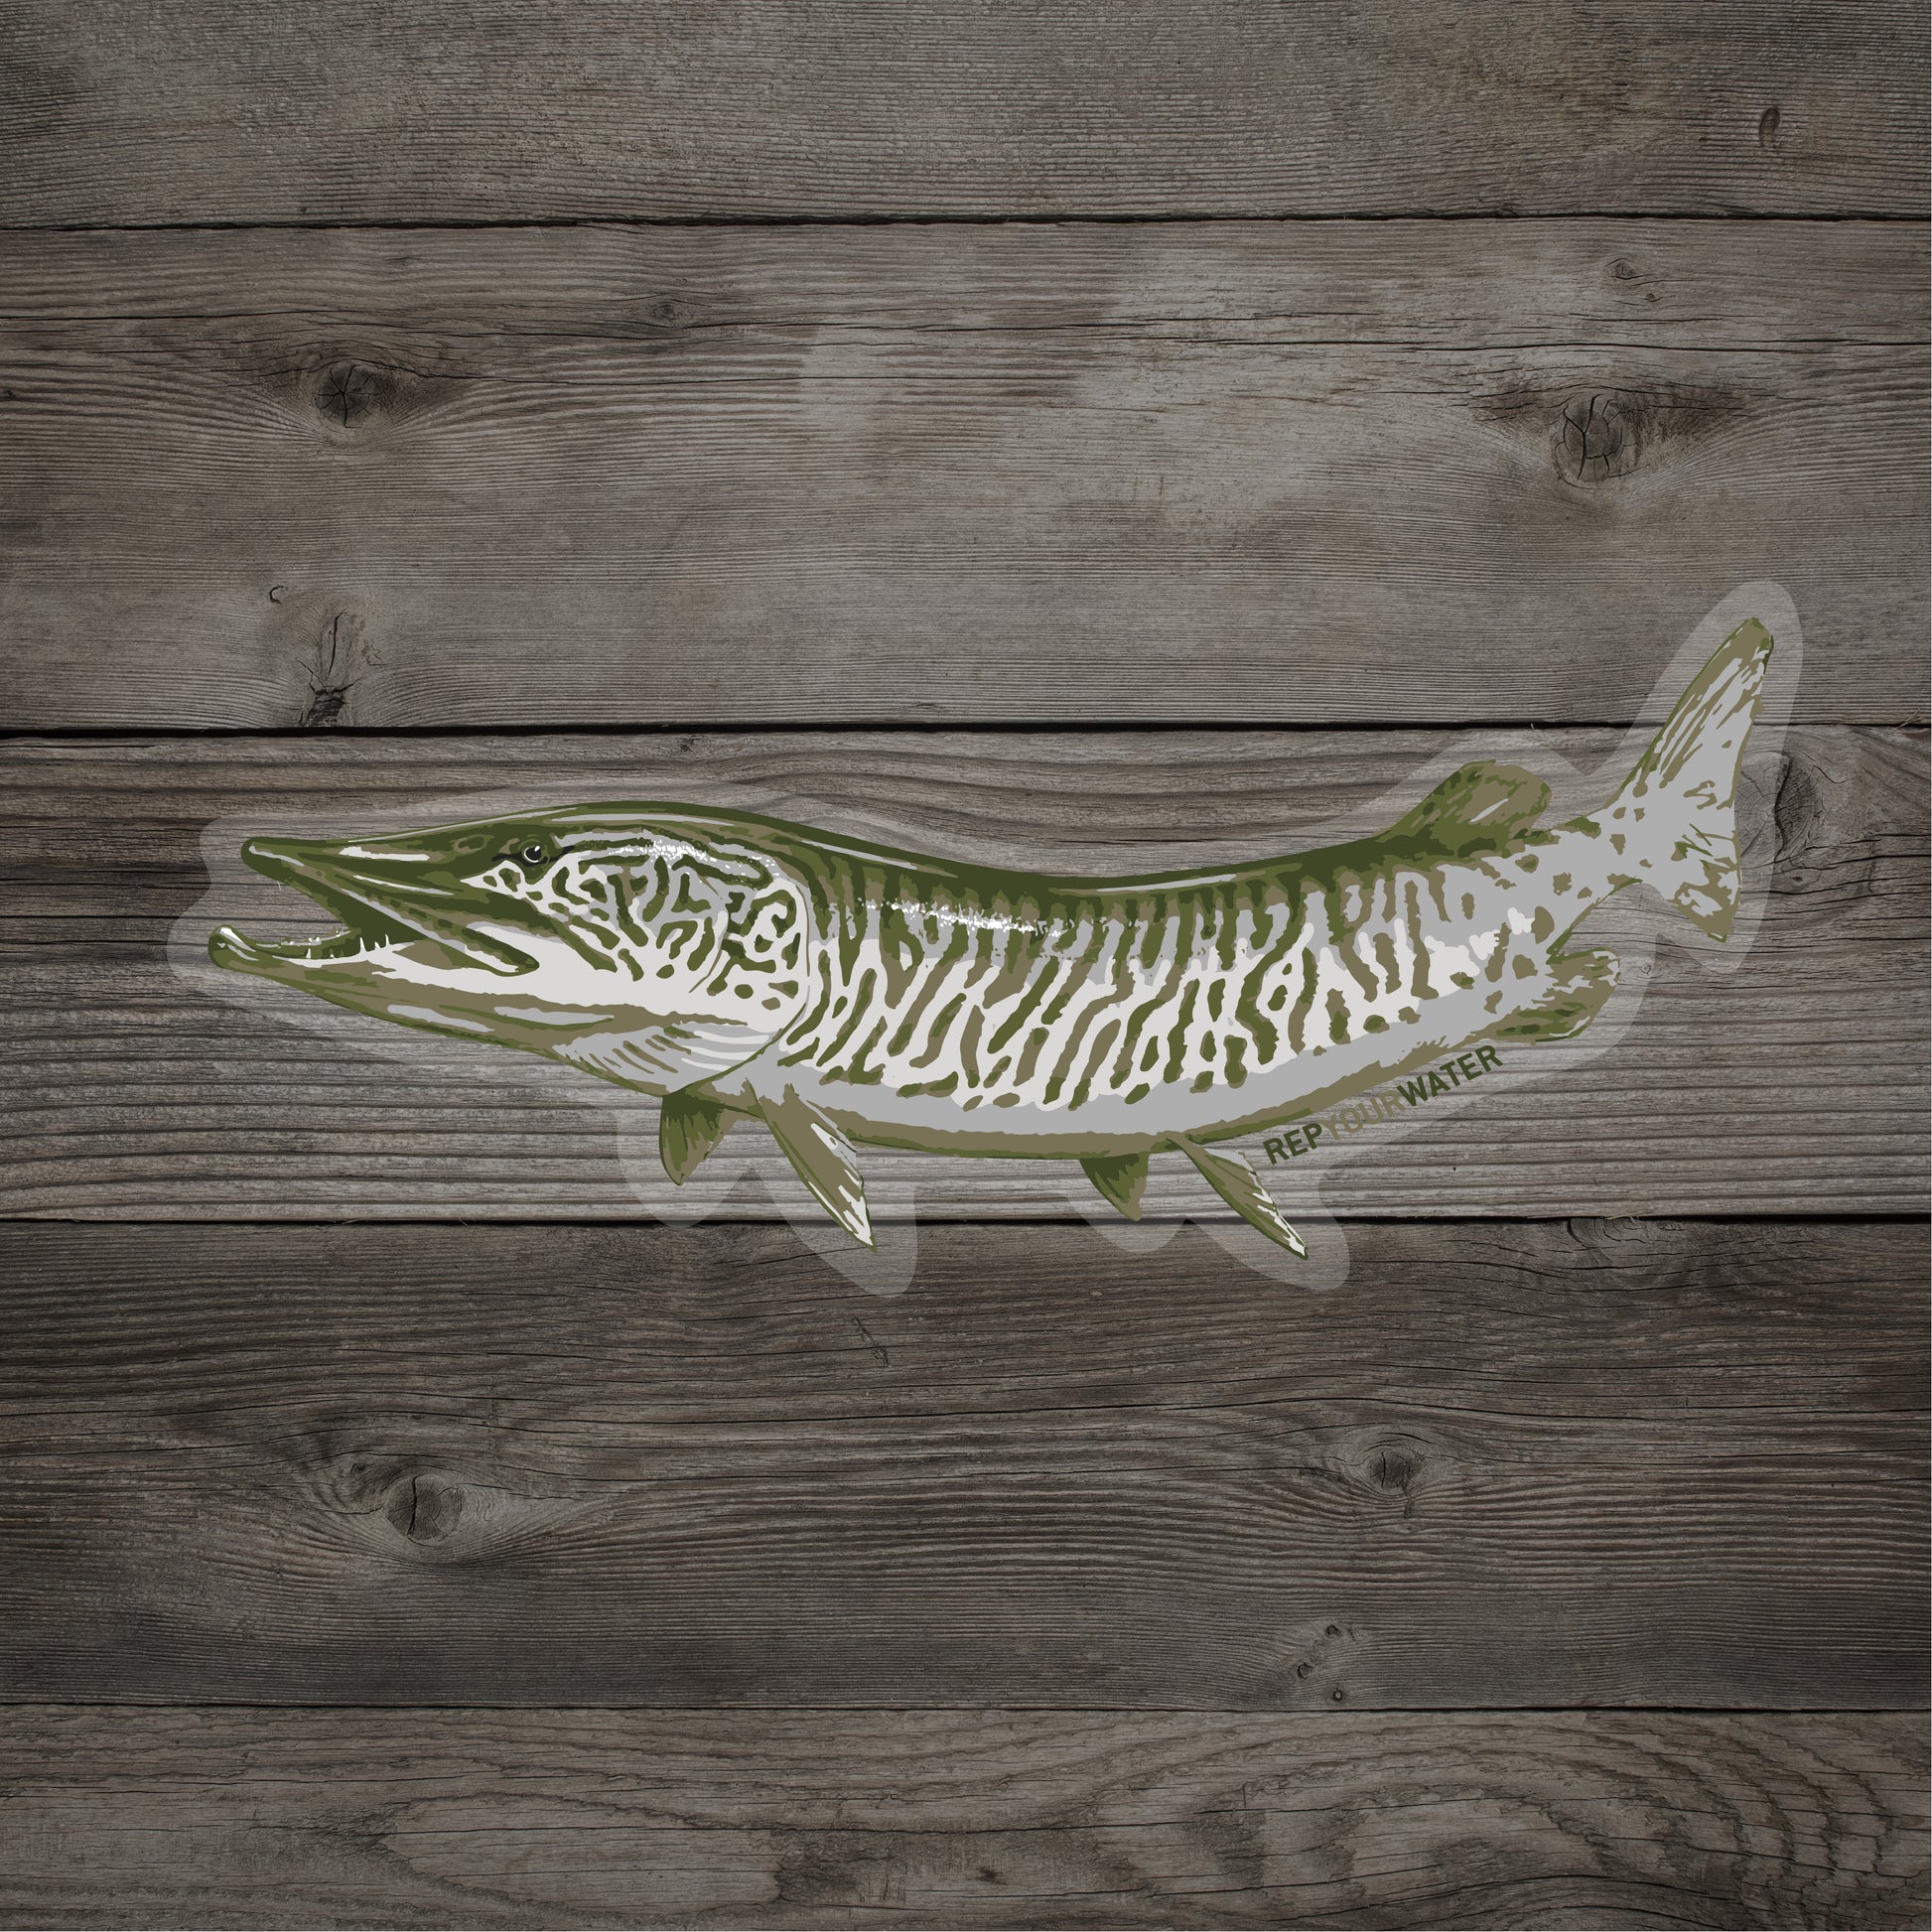 A wood background has the mockup of a sticker showing a large musky